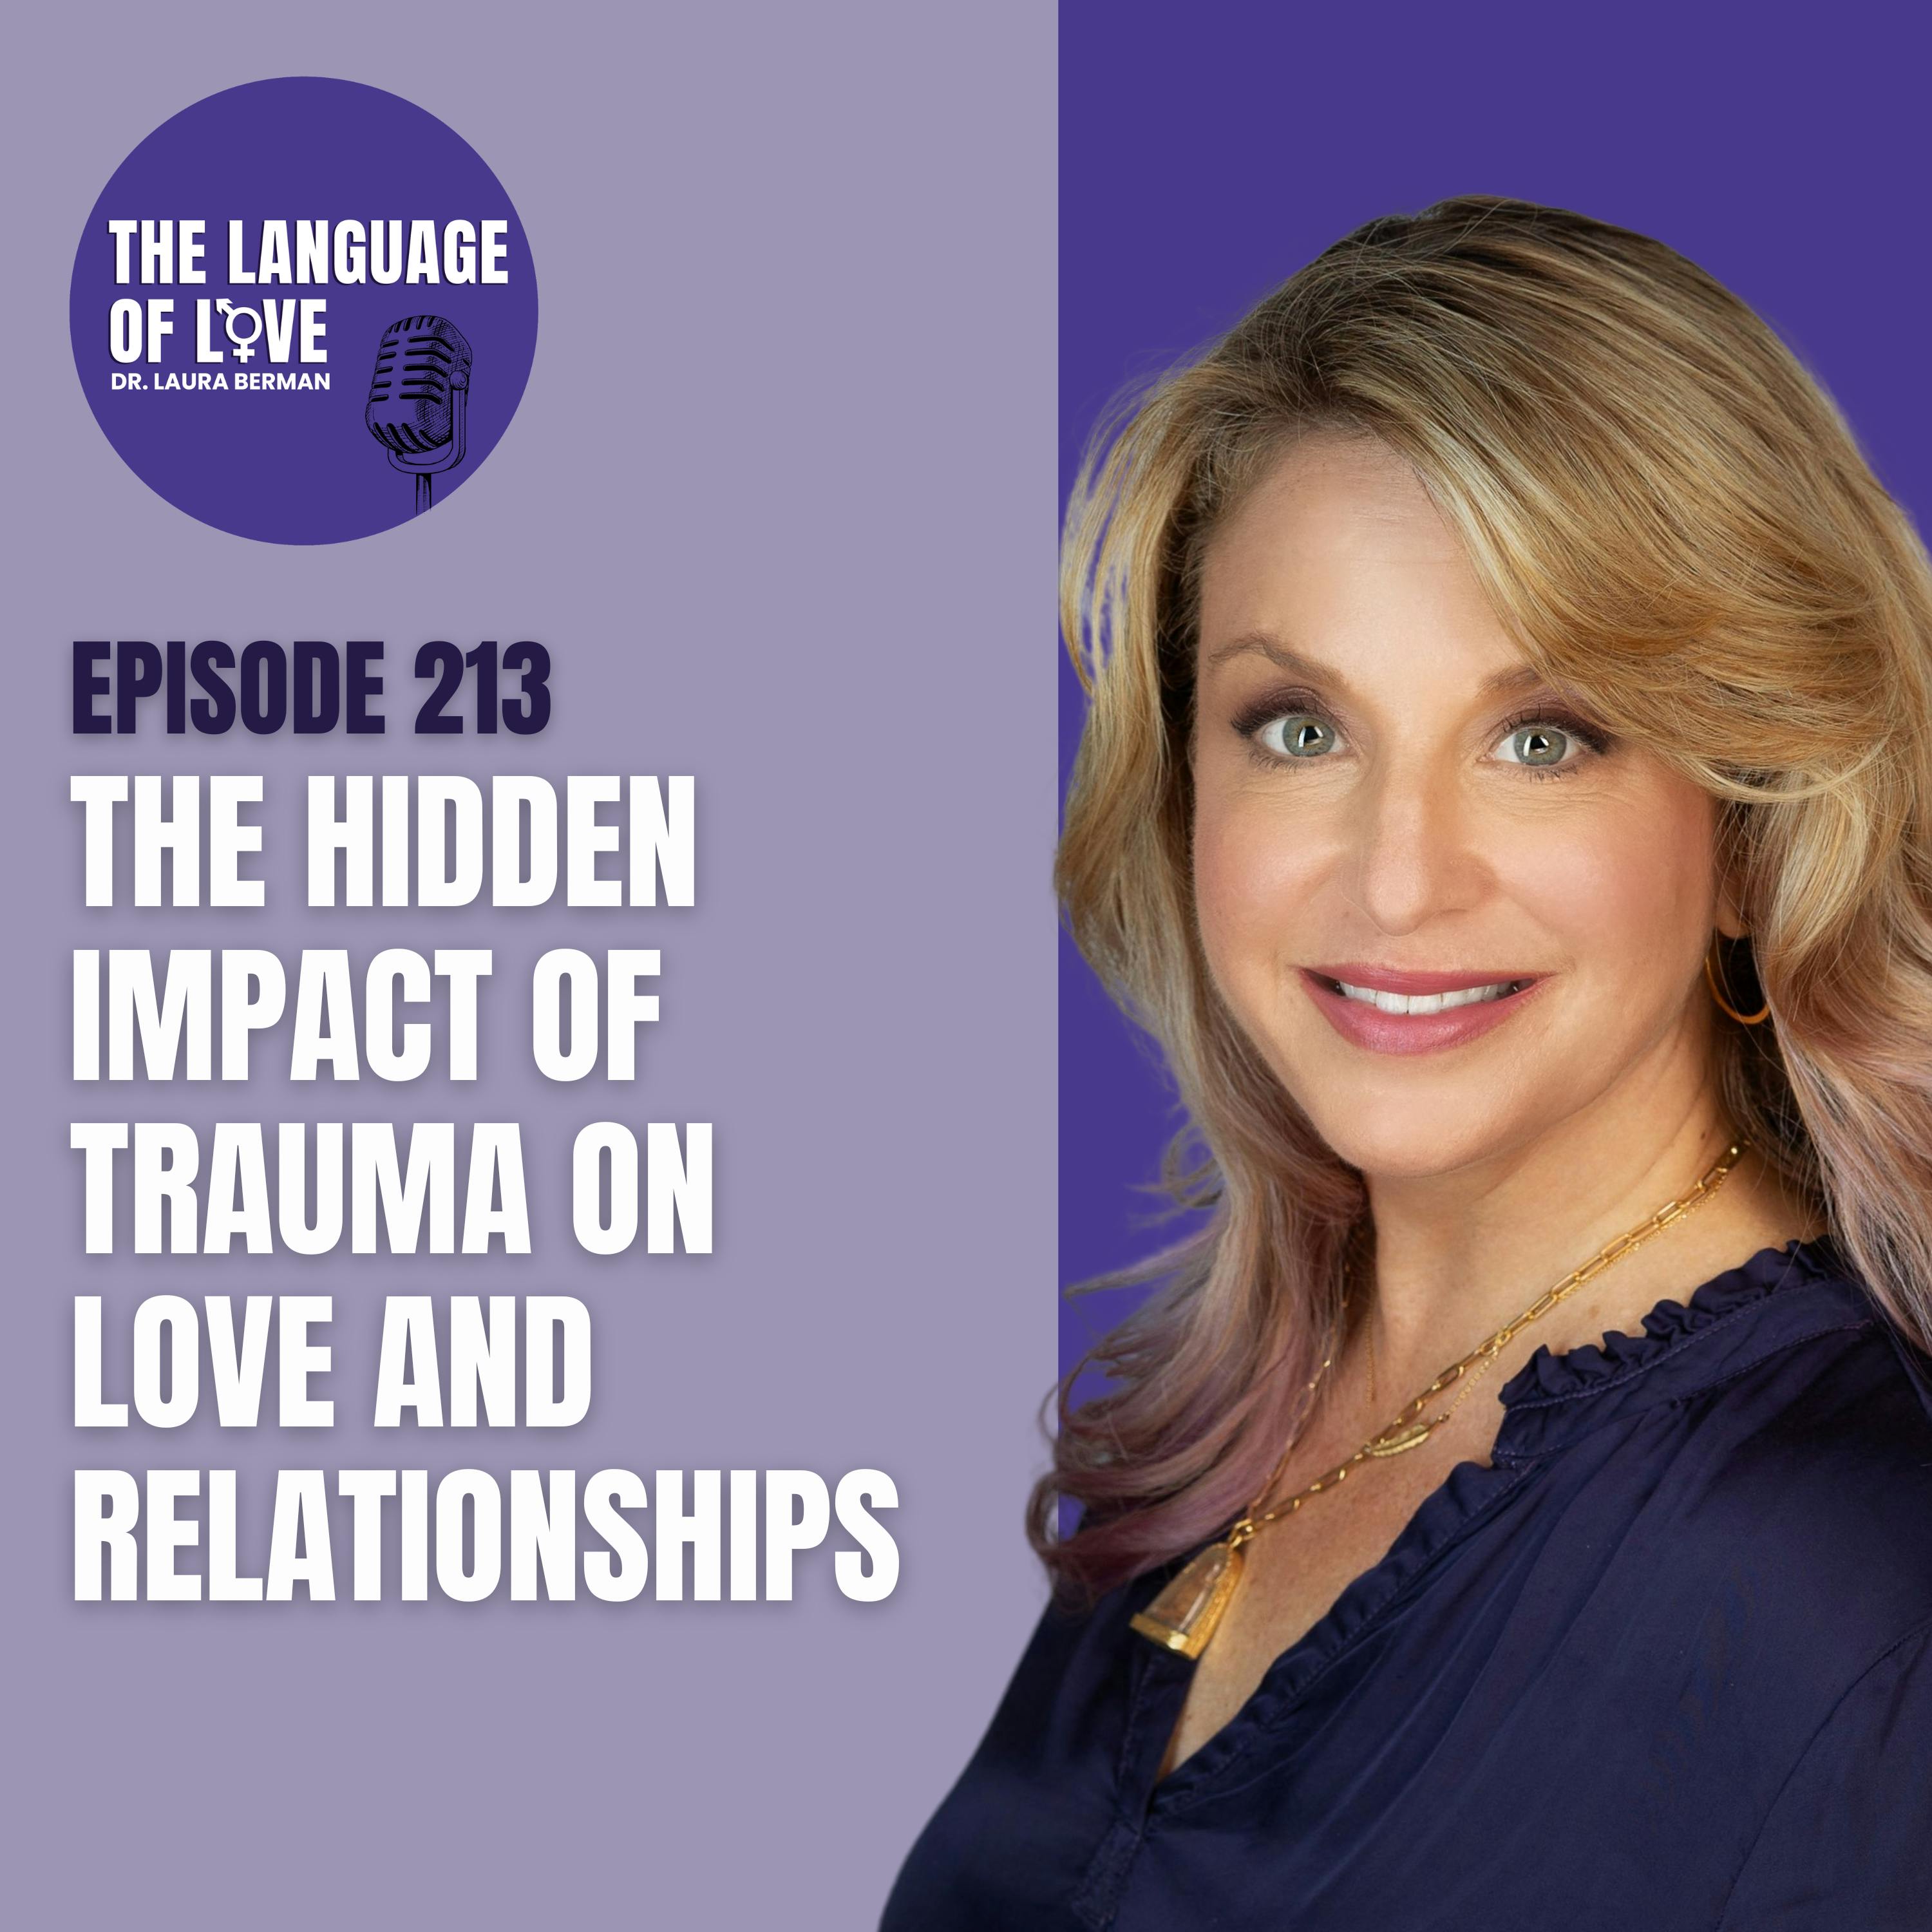 The Hidden Impact of Trauma on Love and Relationships